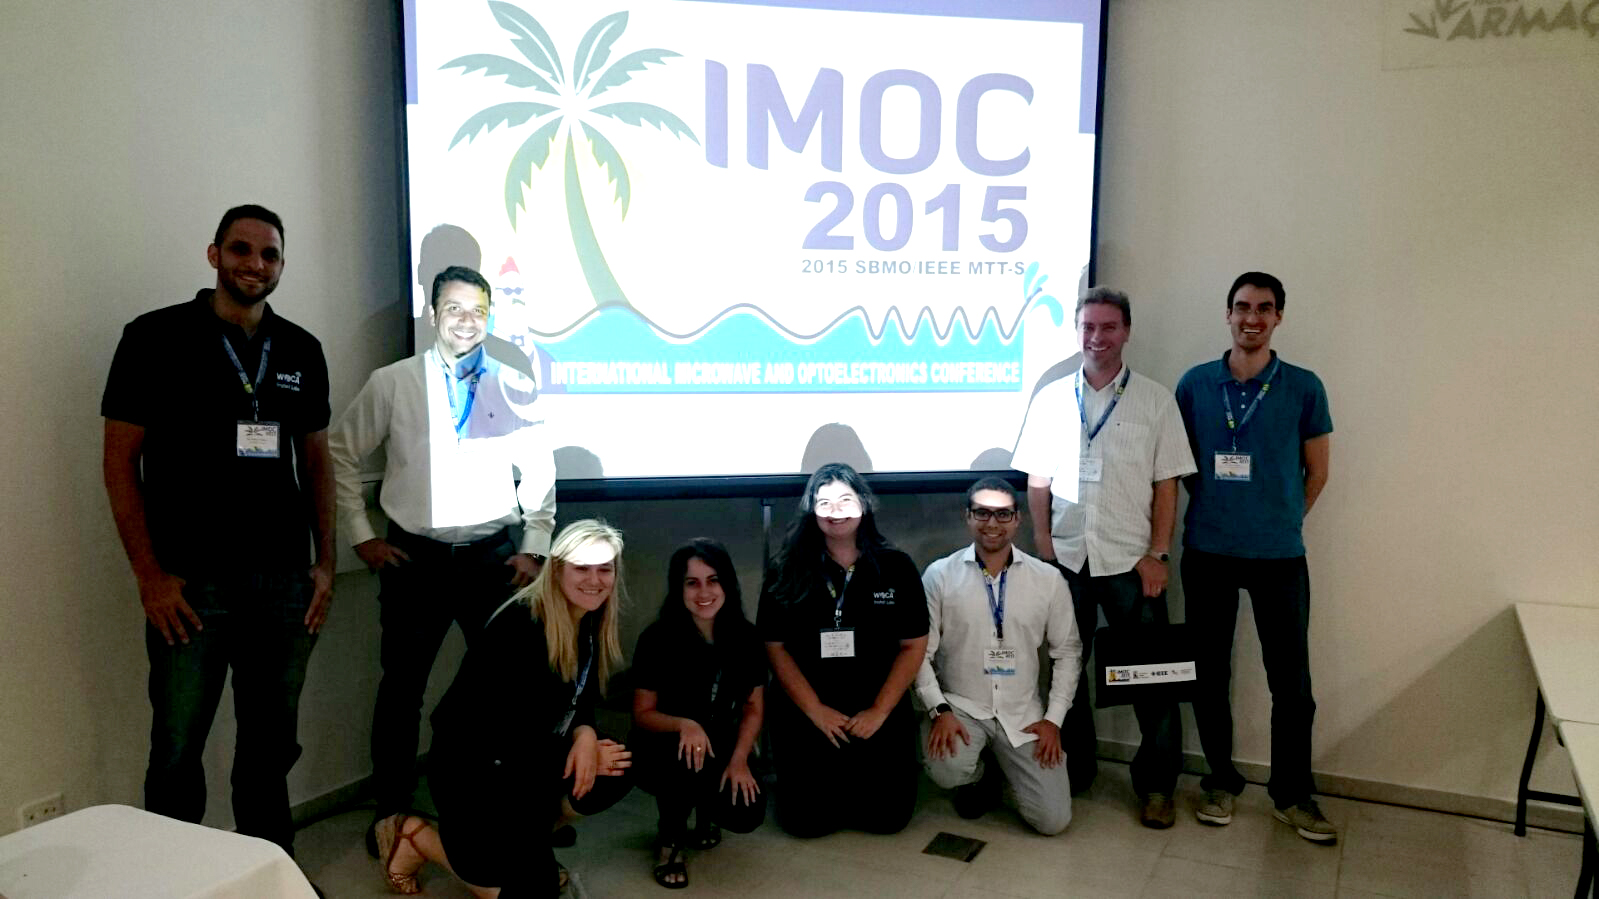 inatel-imoc-out 2015